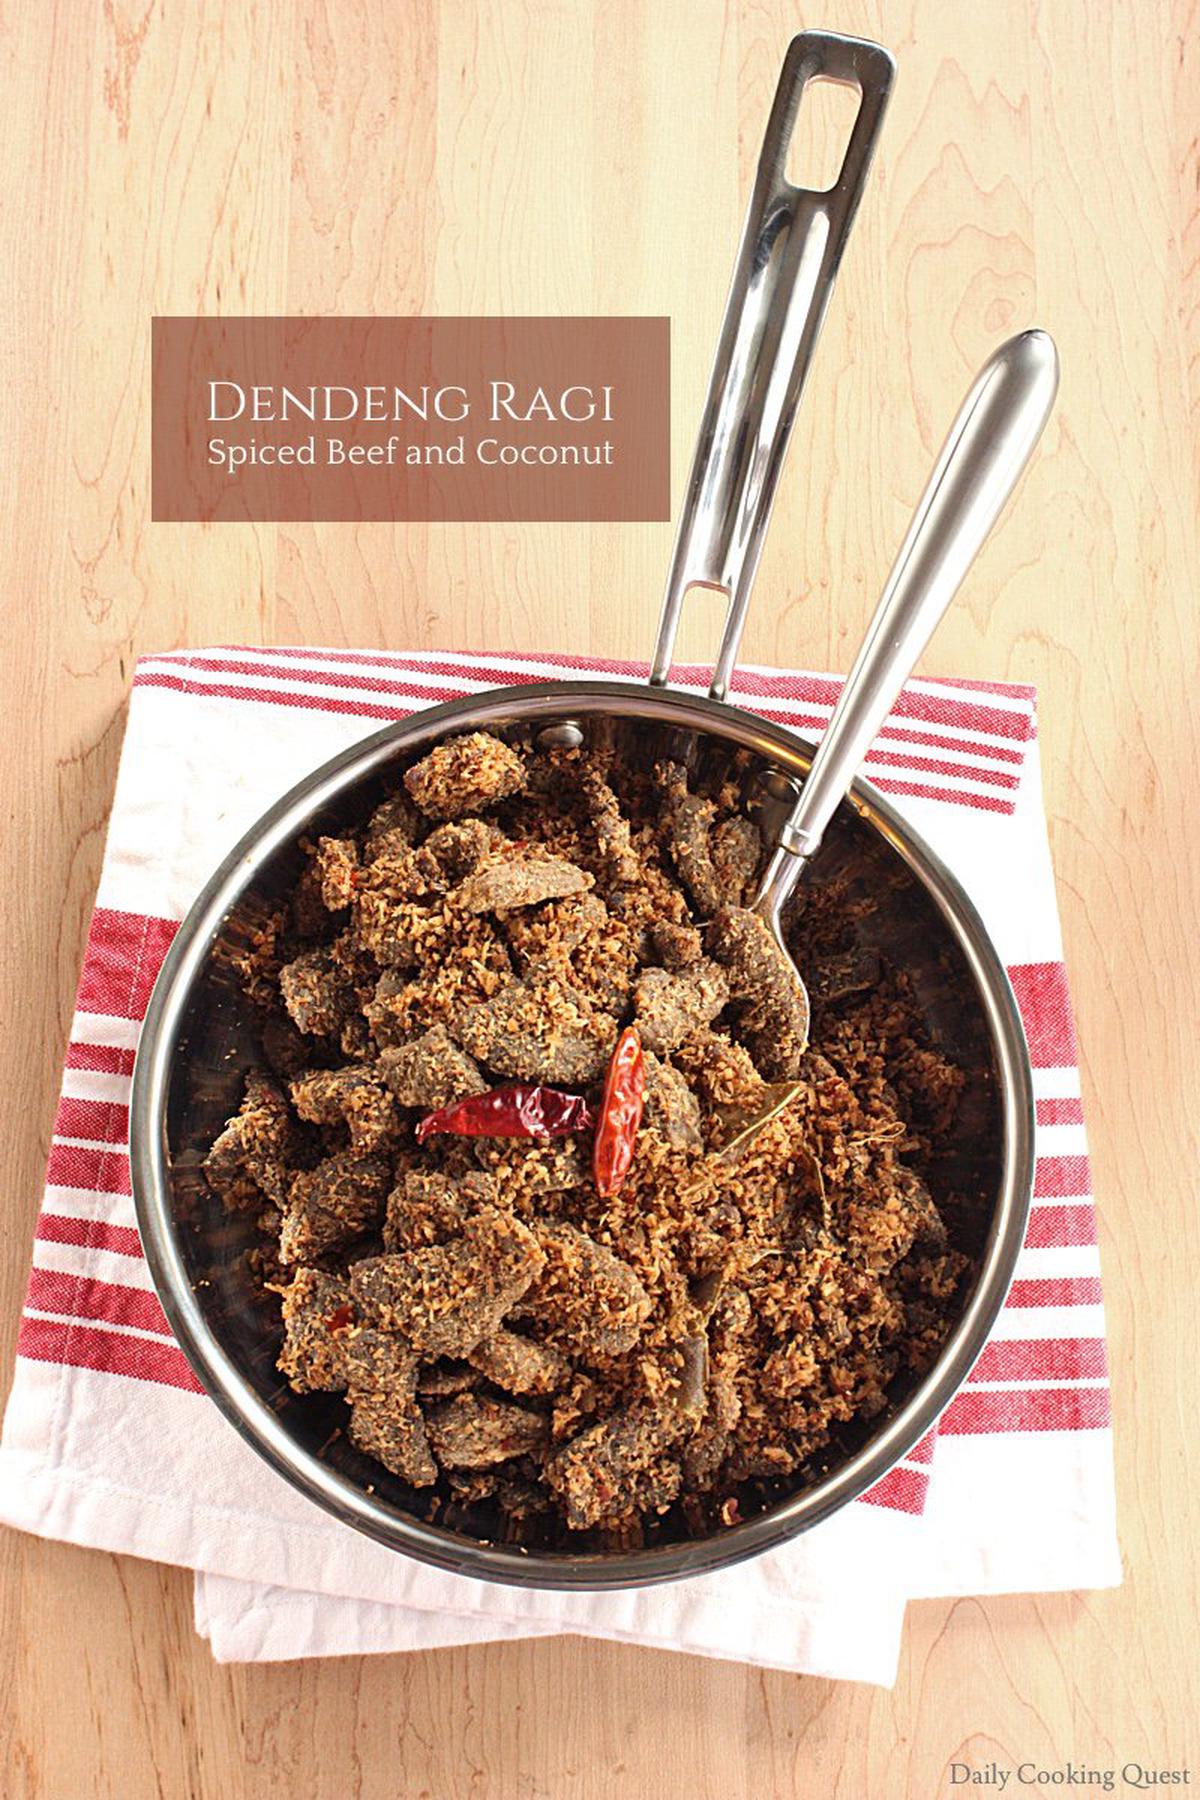 Dendeng Ragi - Spiced Beef and Coconut